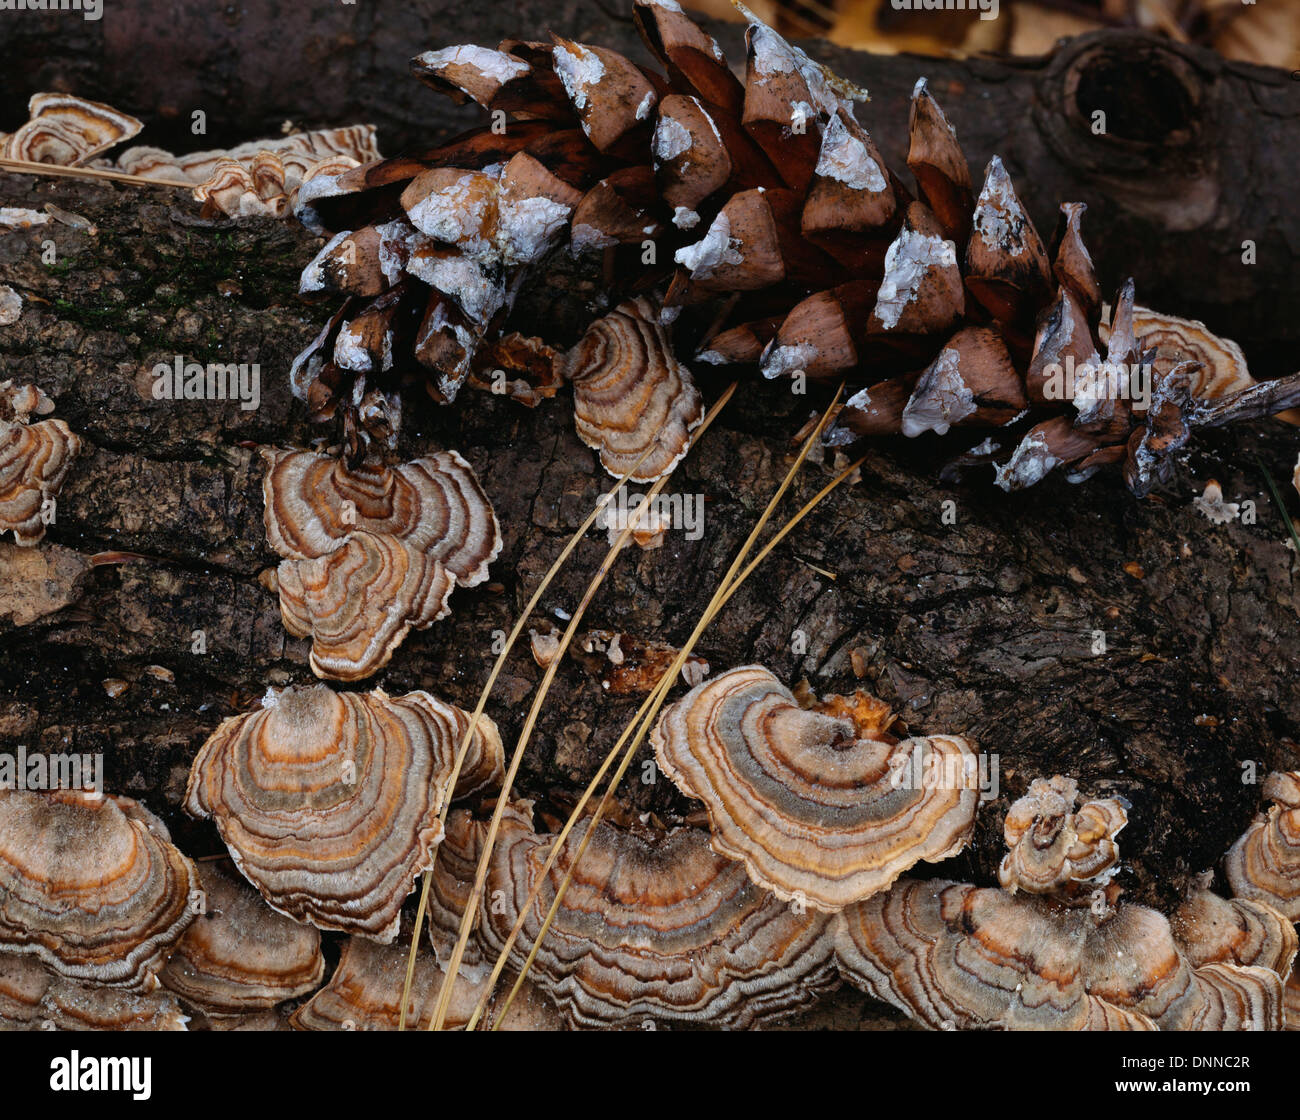 Turkey-tail mushrooms growing on pine log with cone and needles Stock Photo